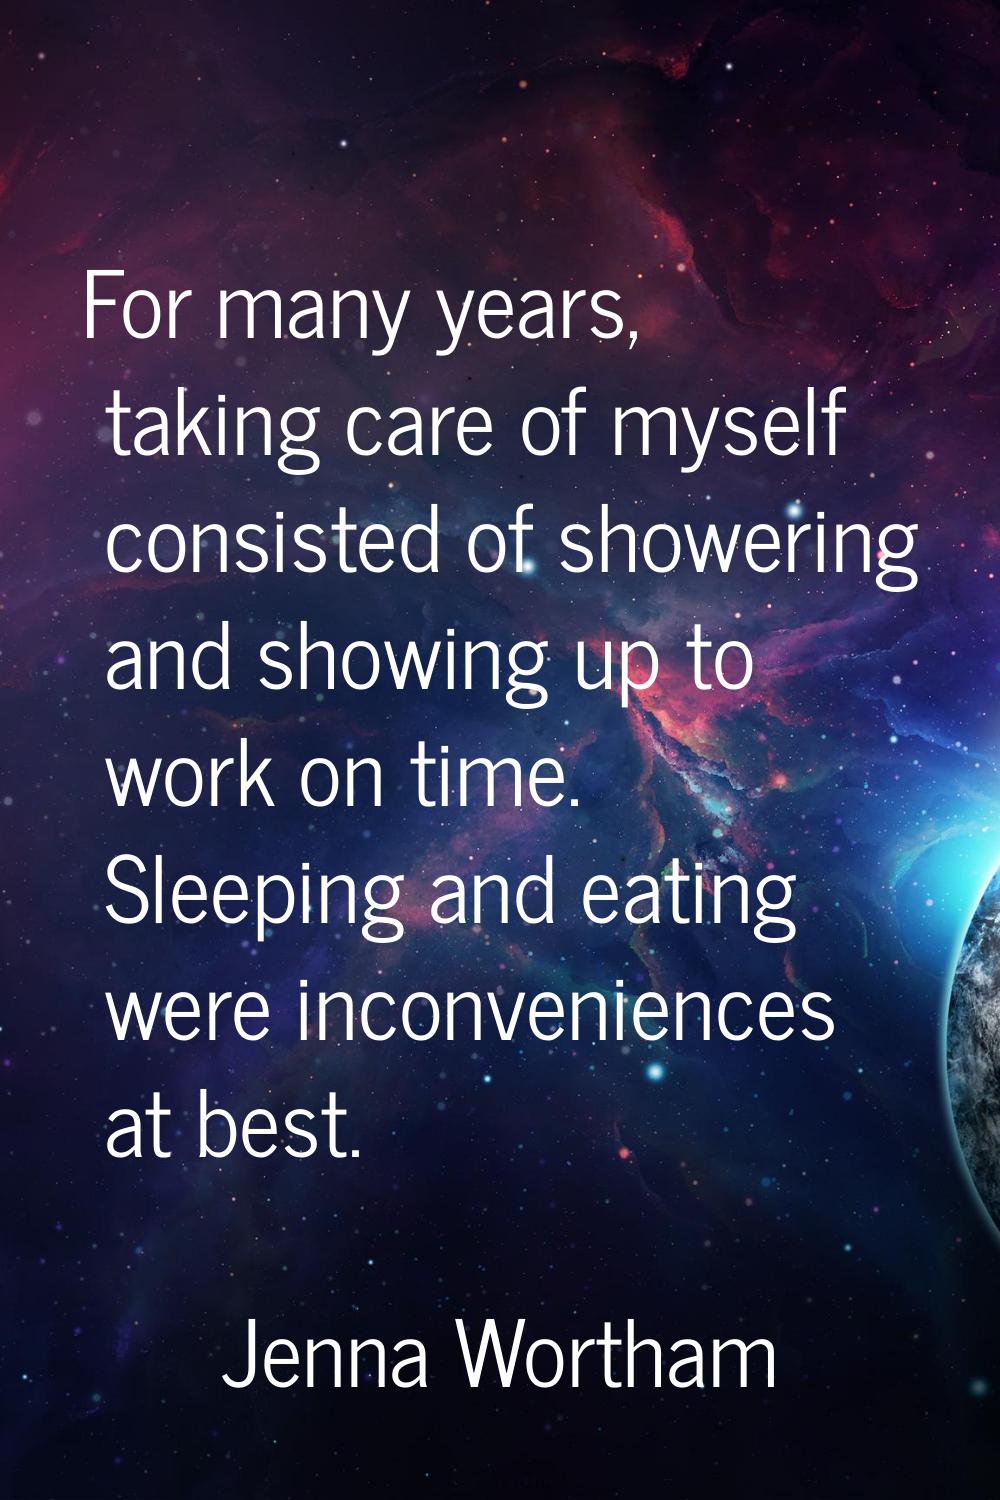 For many years, taking care of myself consisted of showering and showing up to work on time. Sleepi